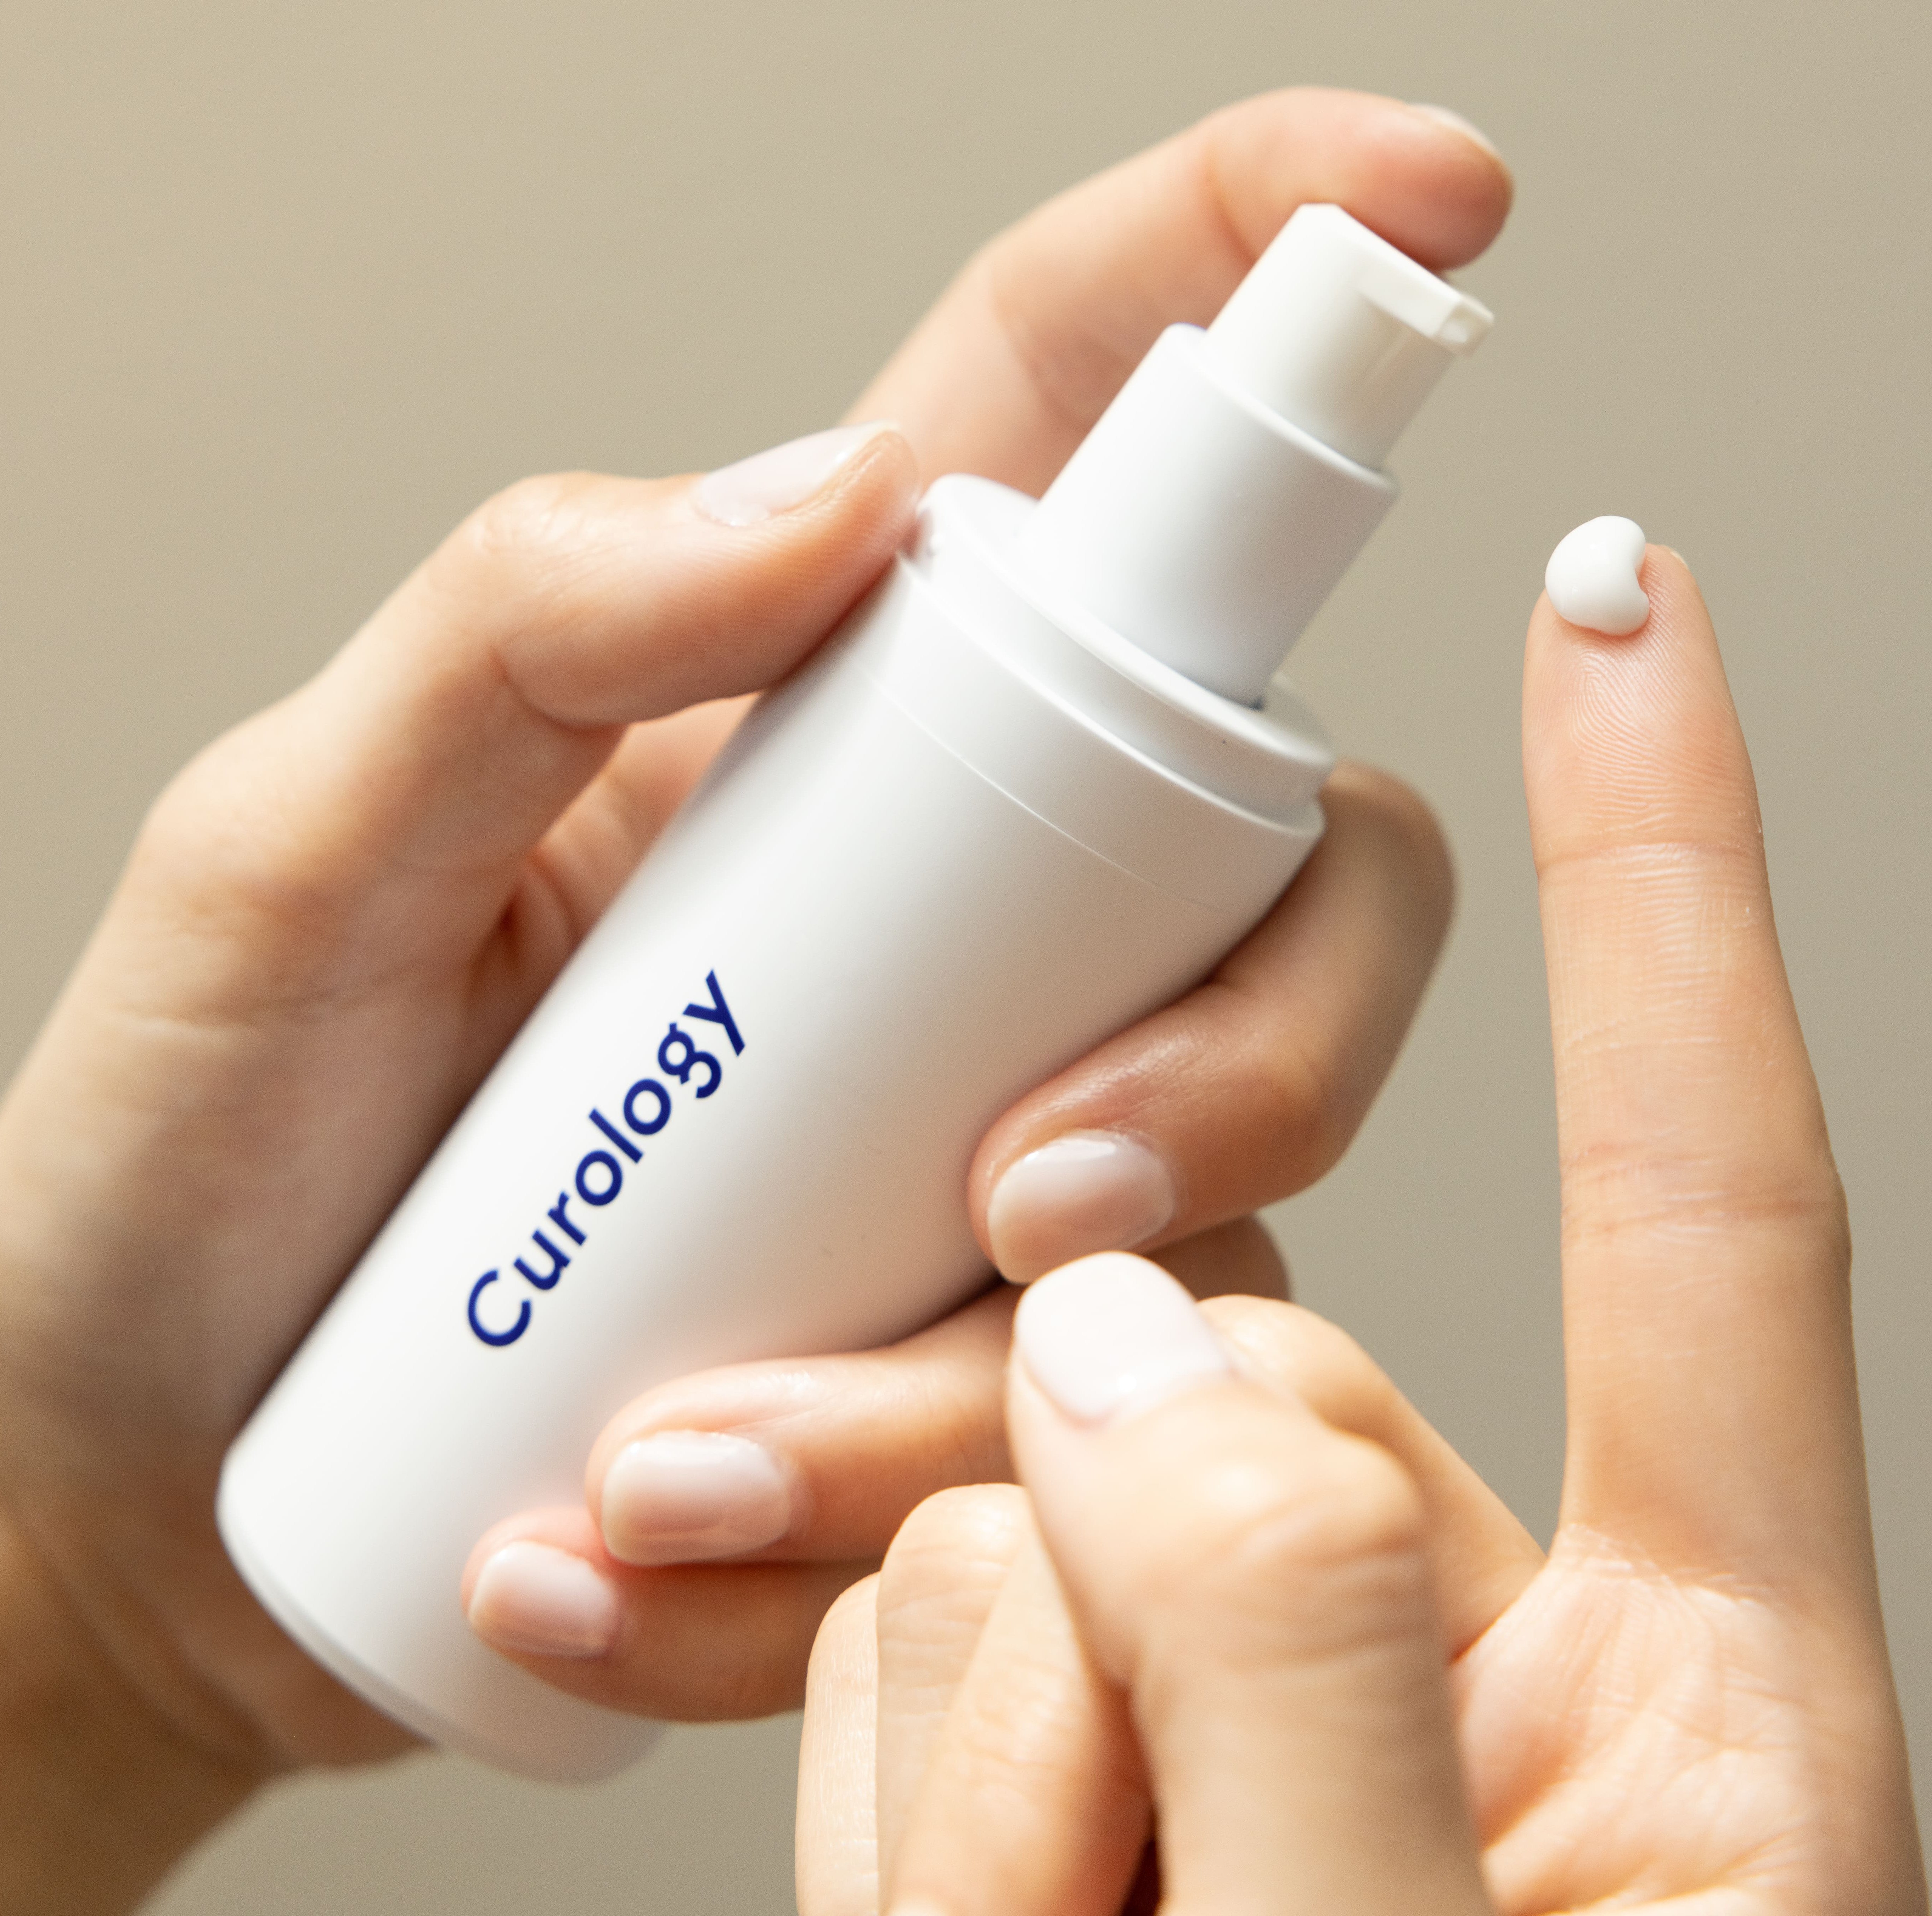 Two hands, the left hand holding a white Curology Custom Formula Rx bottle, the right hand holding up a finger with a pea-size amount of the product.